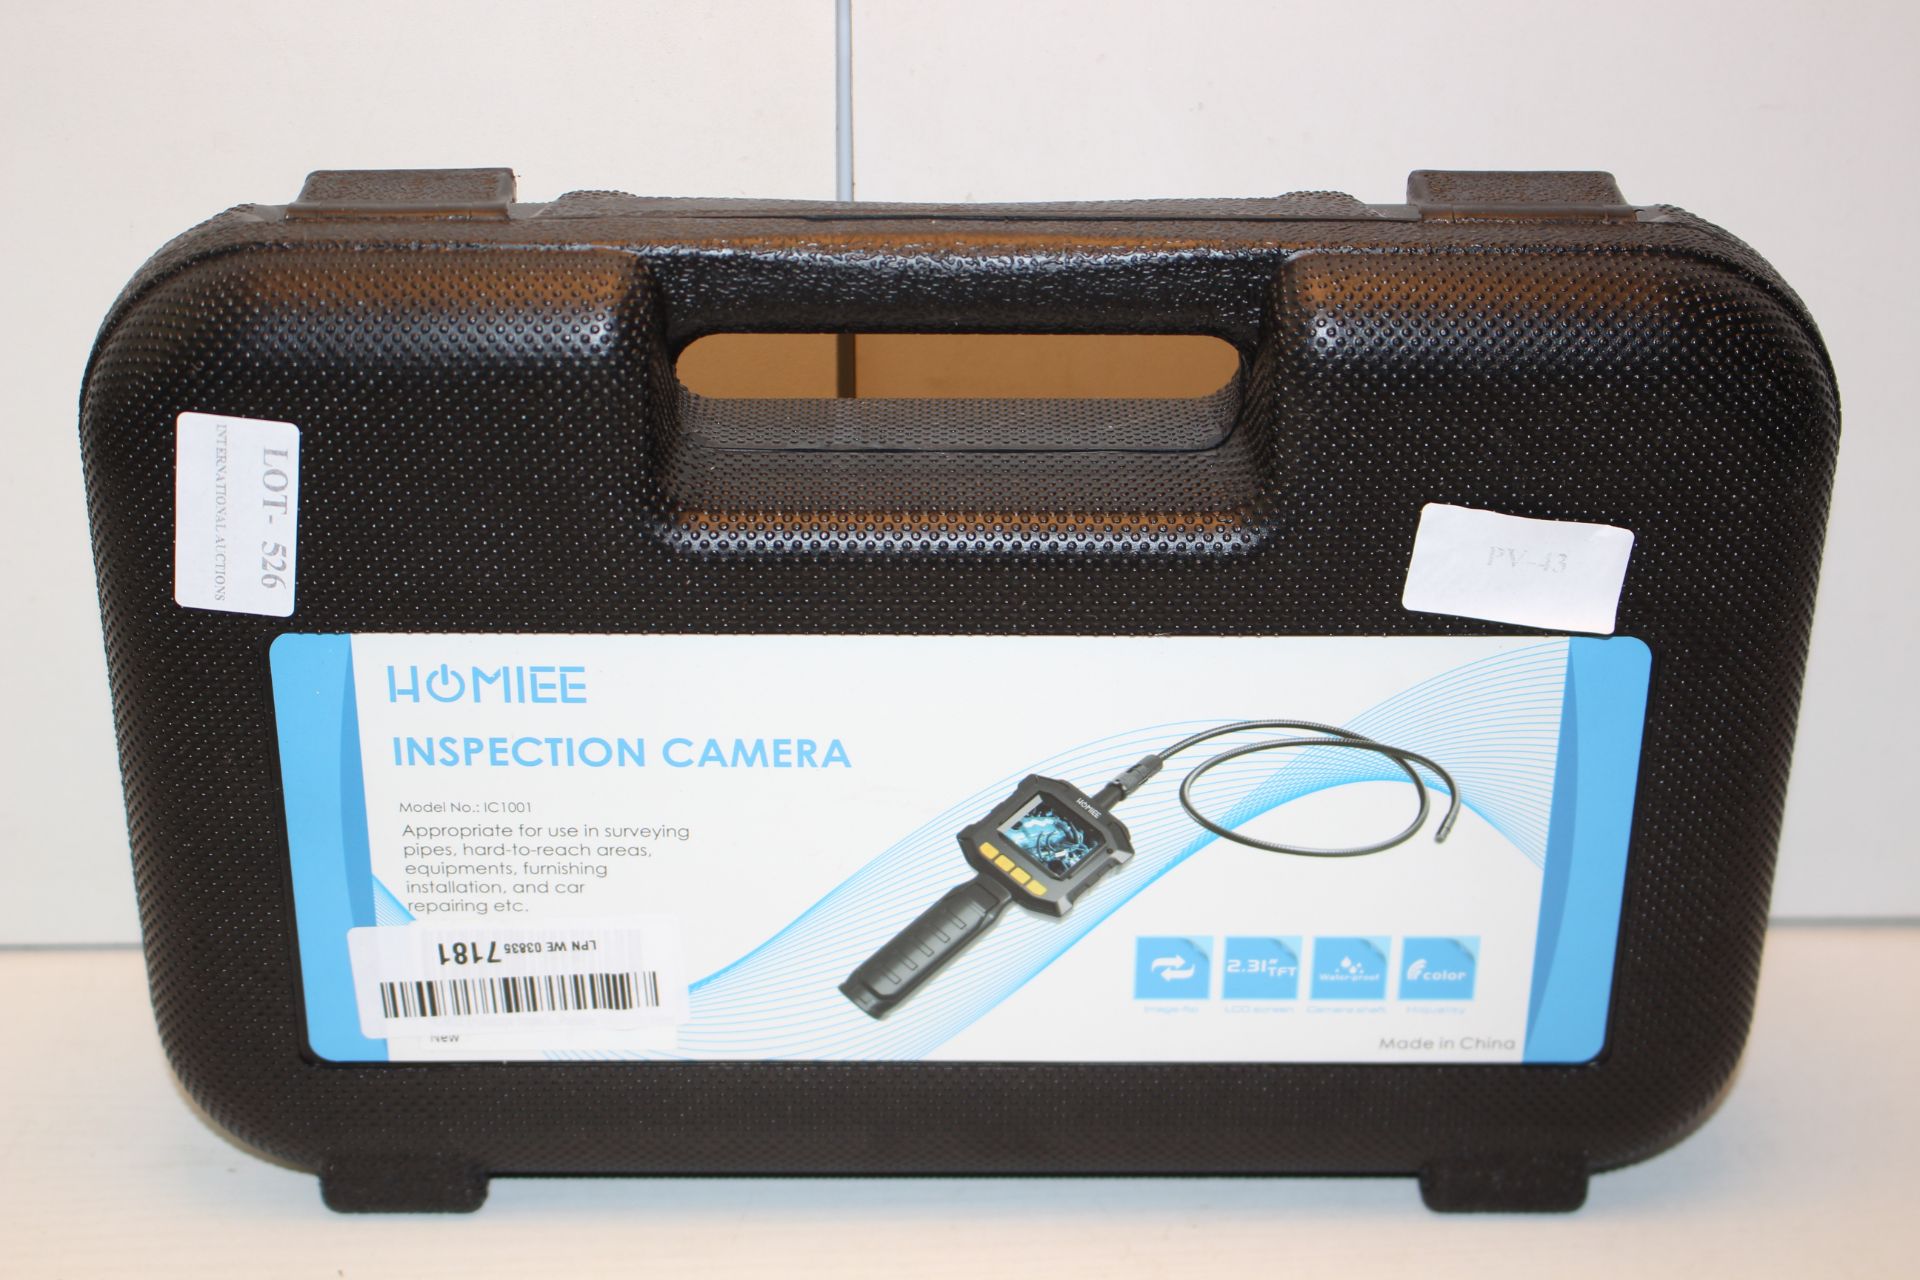 BOXED HOMIEE INSPECTION CAMERA MODEL NO: IC1001 RRP £66.99Condition ReportAppraisal Available on